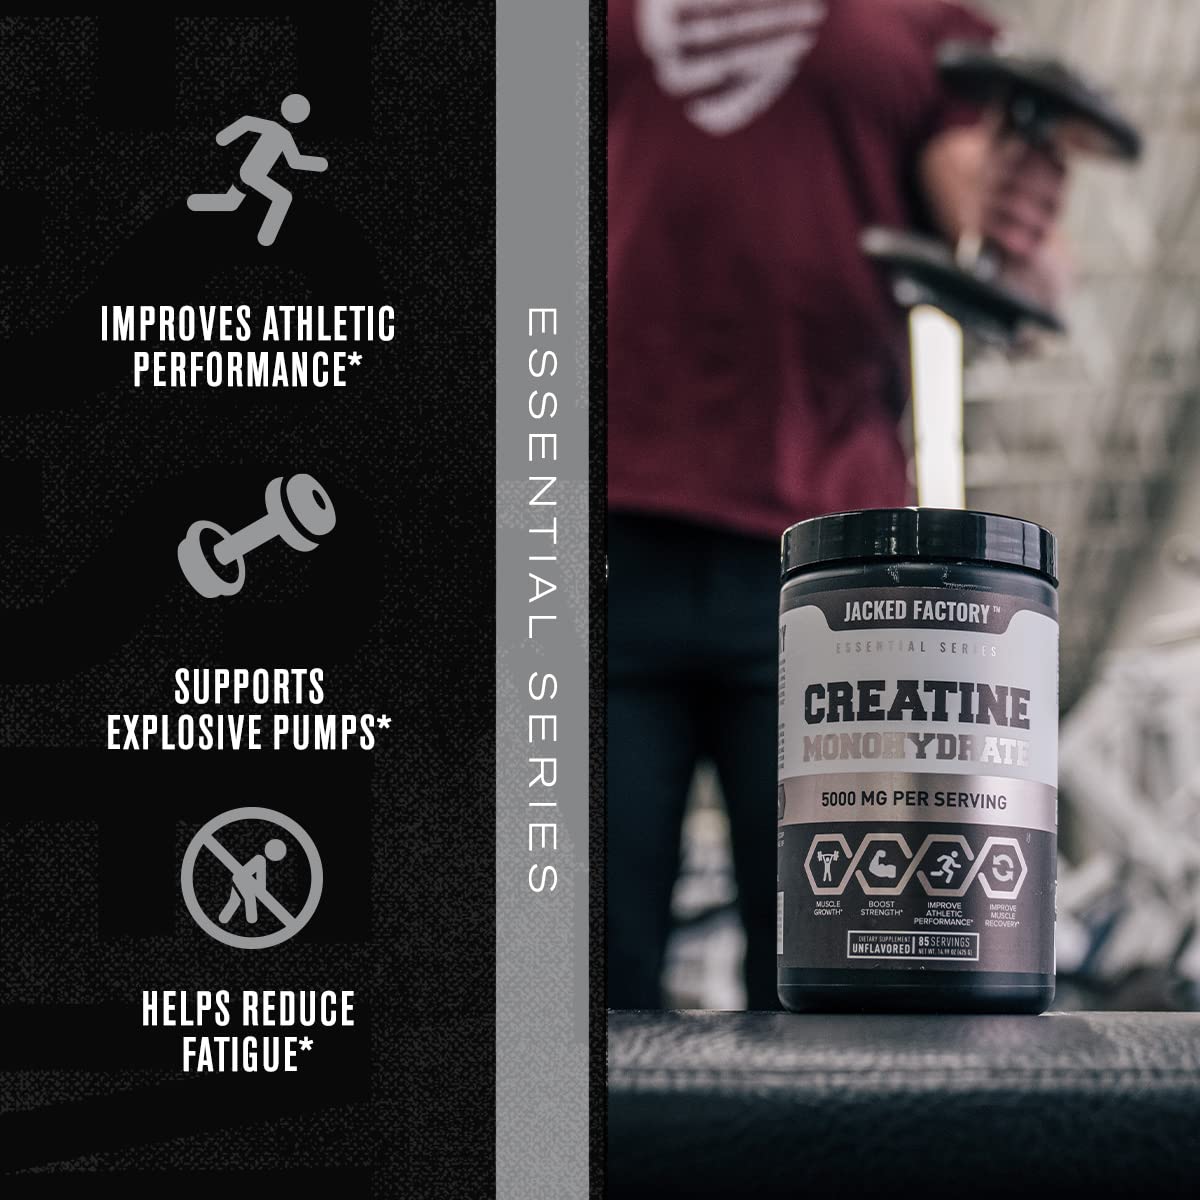 Nitrosurge Pre-Workout & Creatine Monohydrate - Pre Workout Powder With Creatine for Muscle Growth, Increased Strength, Endless Energy, Intense Pumps - Cherry Limeade Preworkout & Unflavored Creatine